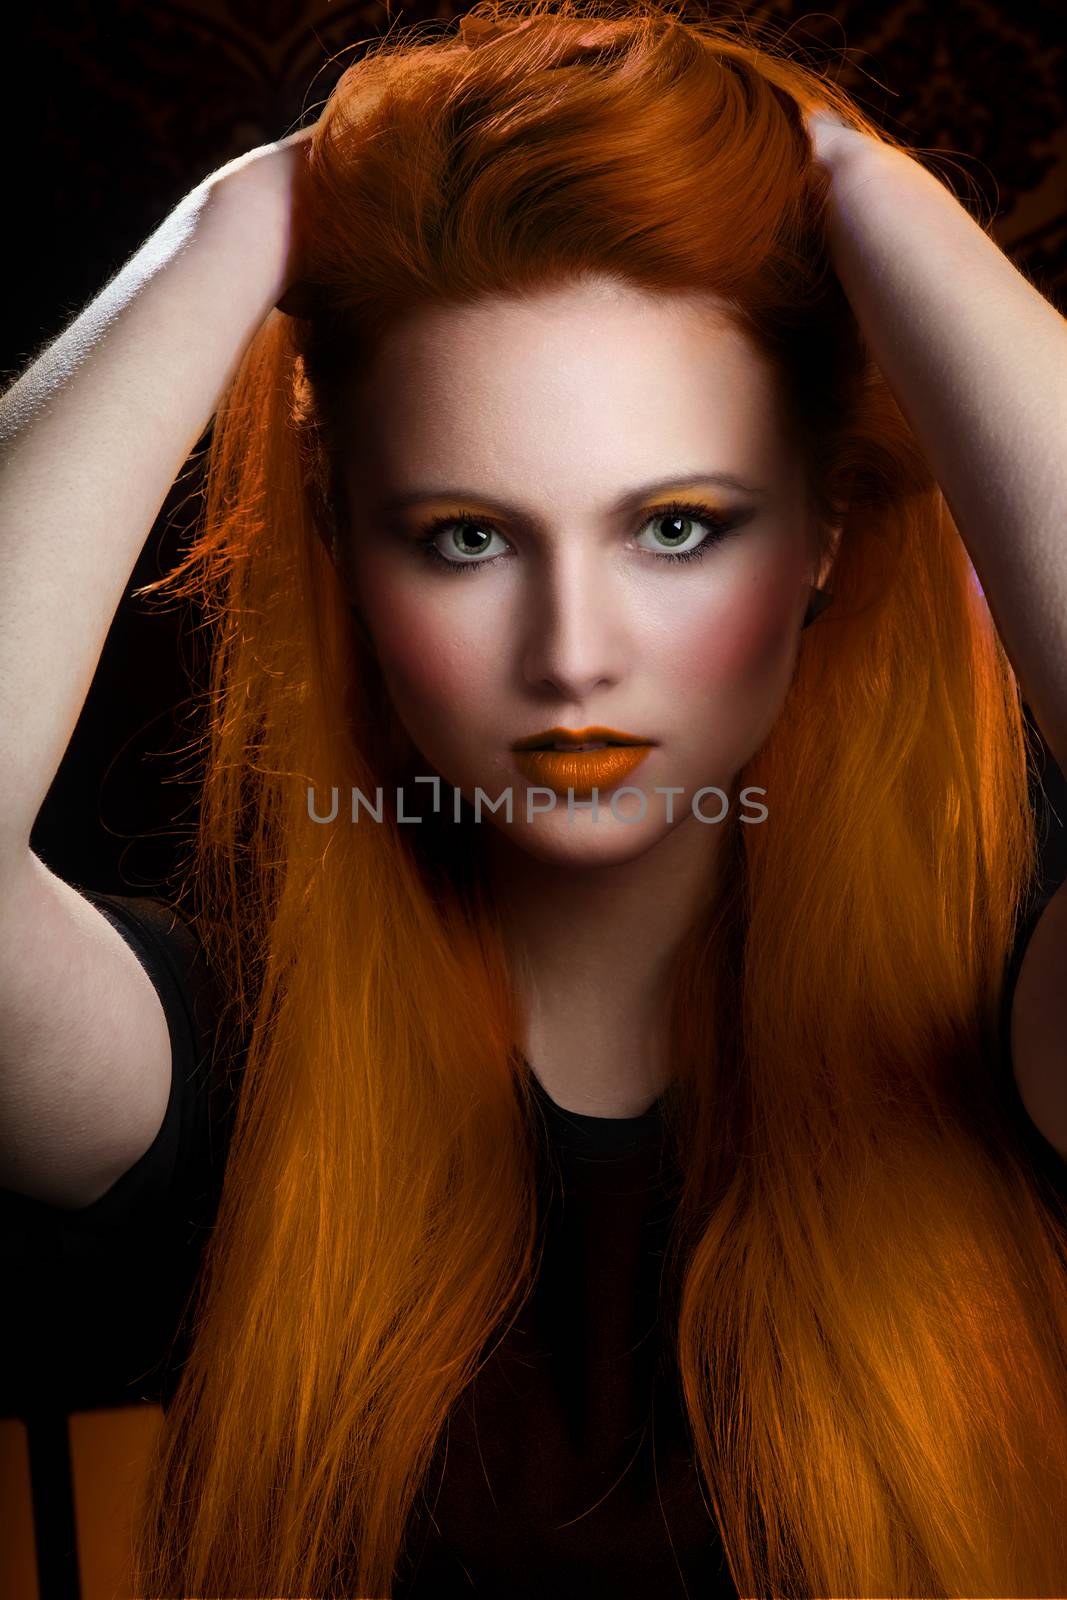 pretty girl with very long orange hair and green eyes. heavy makeup and clean face. Model with pretty face